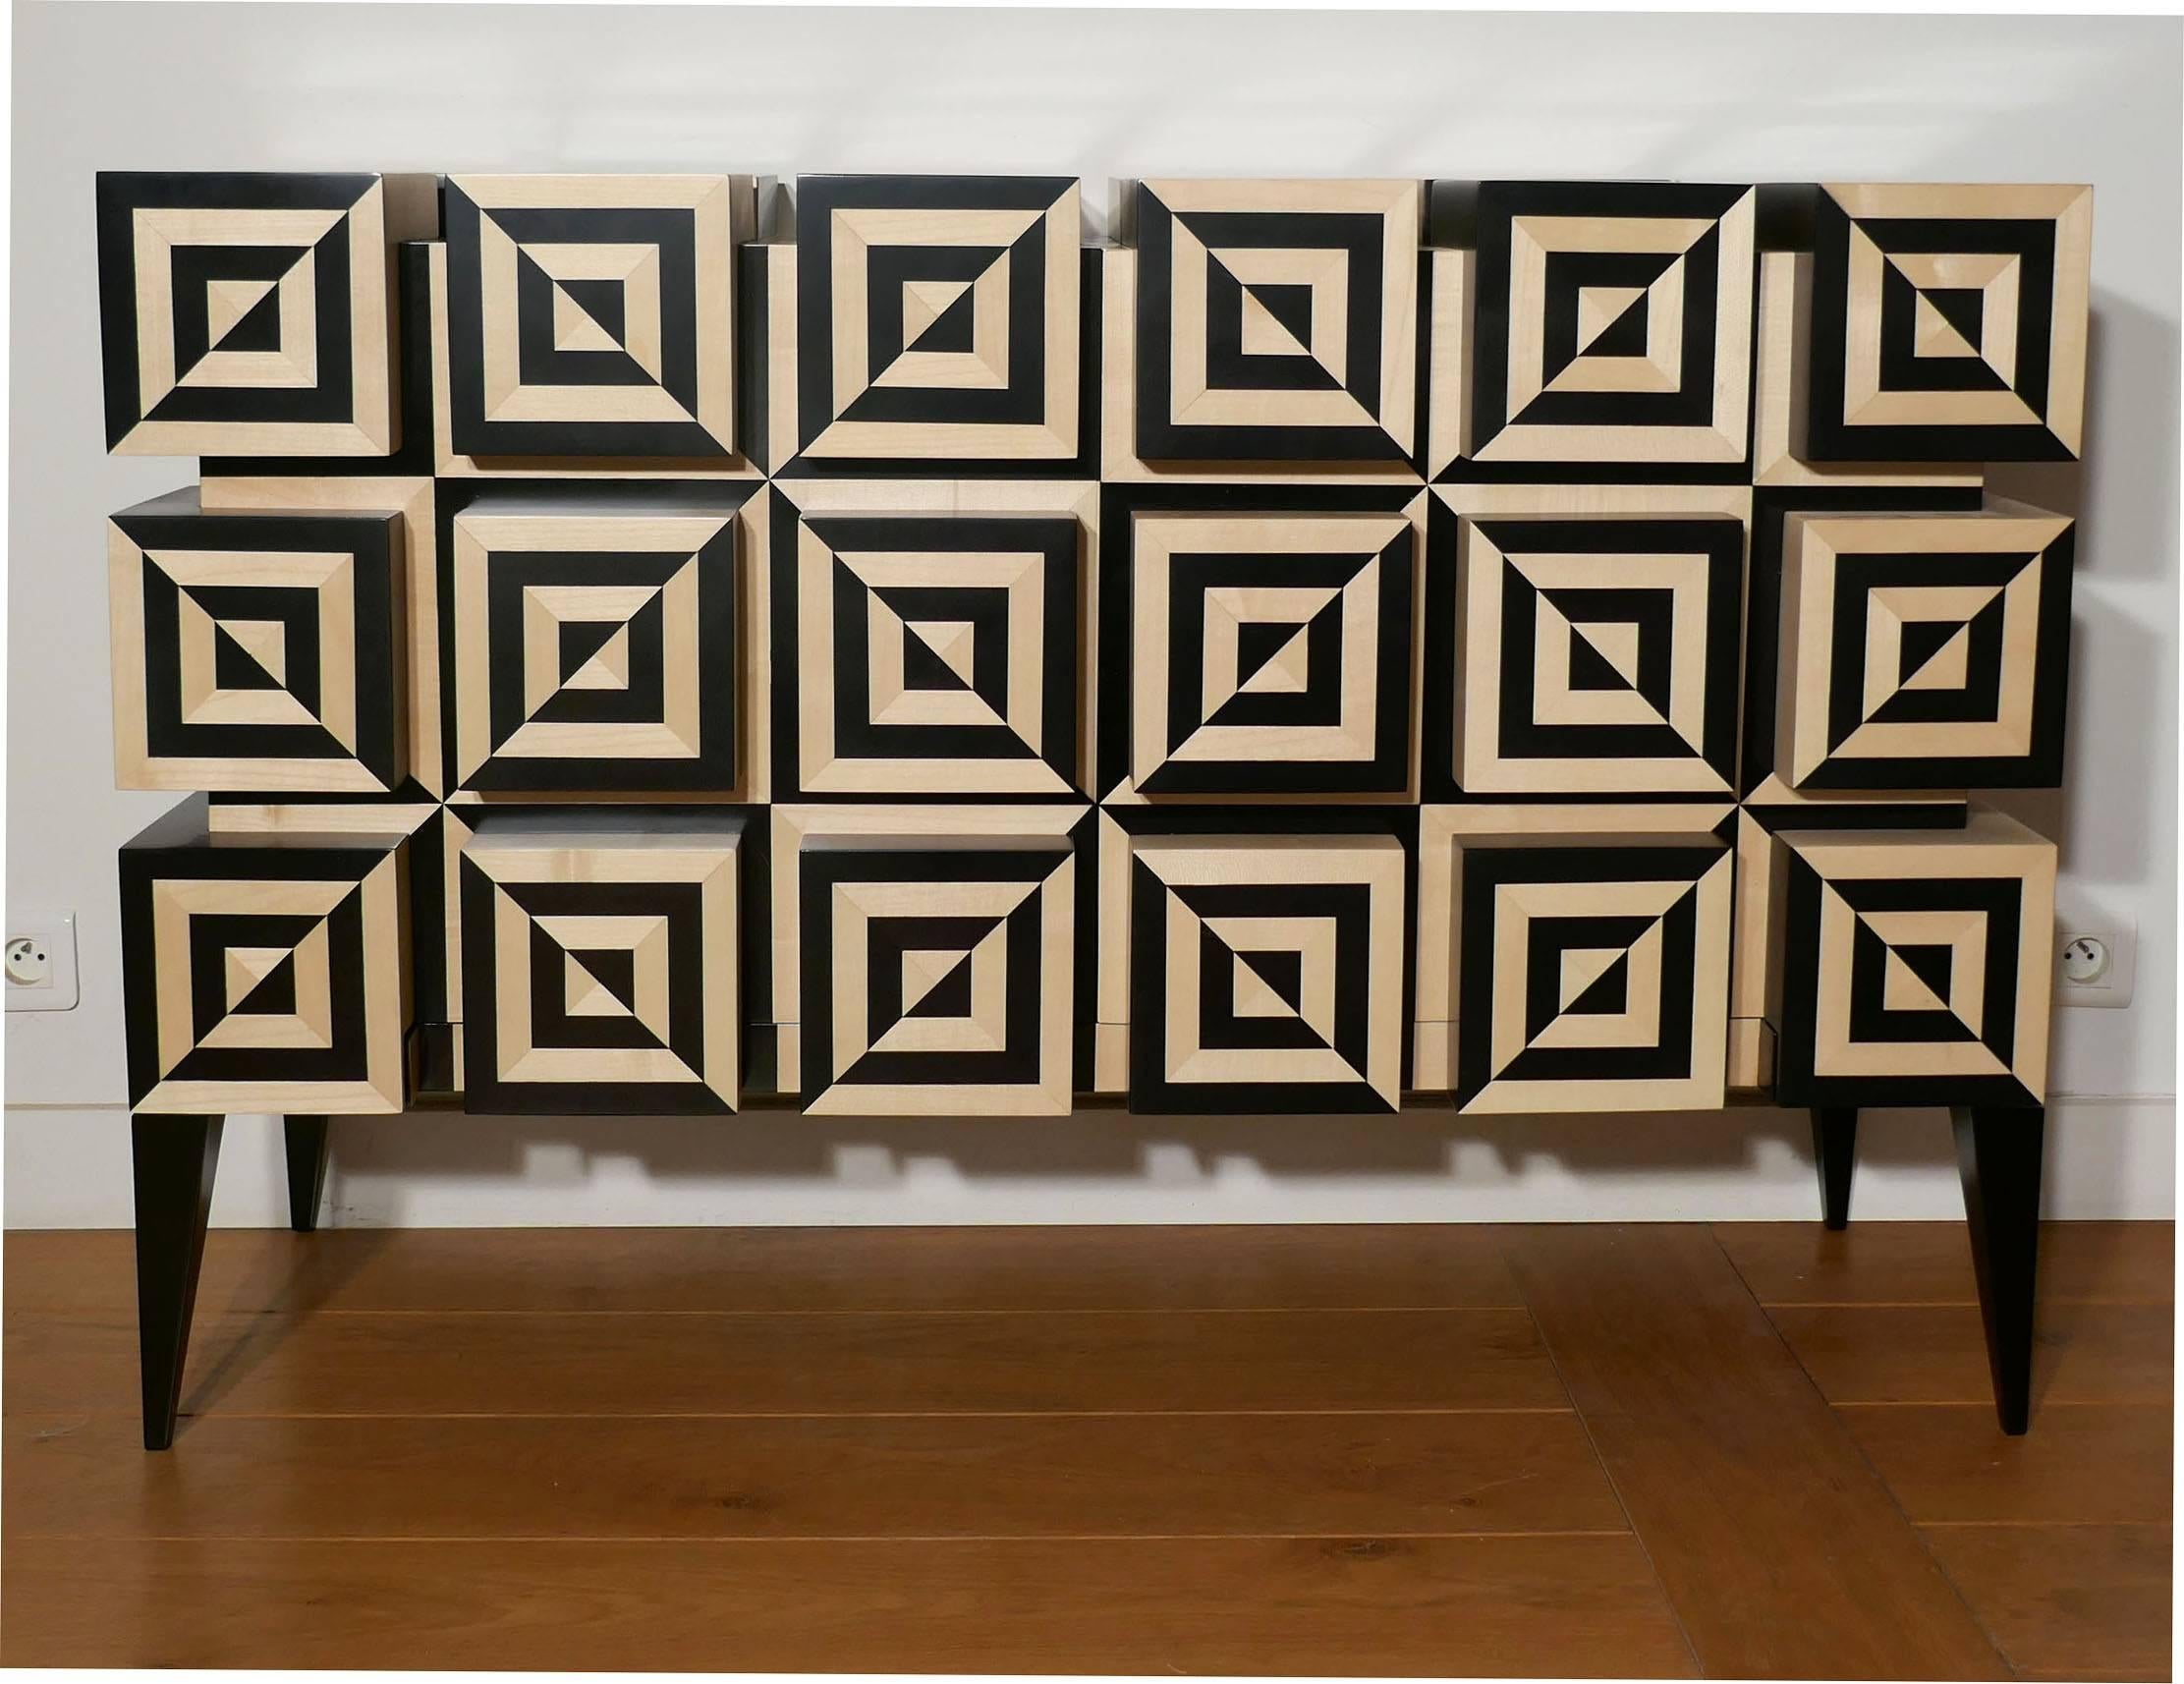 “Ondulation 2” is an association of 42 squares, Black tinted sycamore and White sycamore marquetry to create a Kinetic distortion. More than 700 pieces are needed to build this marquetery.
The buffet opens in two doors to reveal one shelf in the